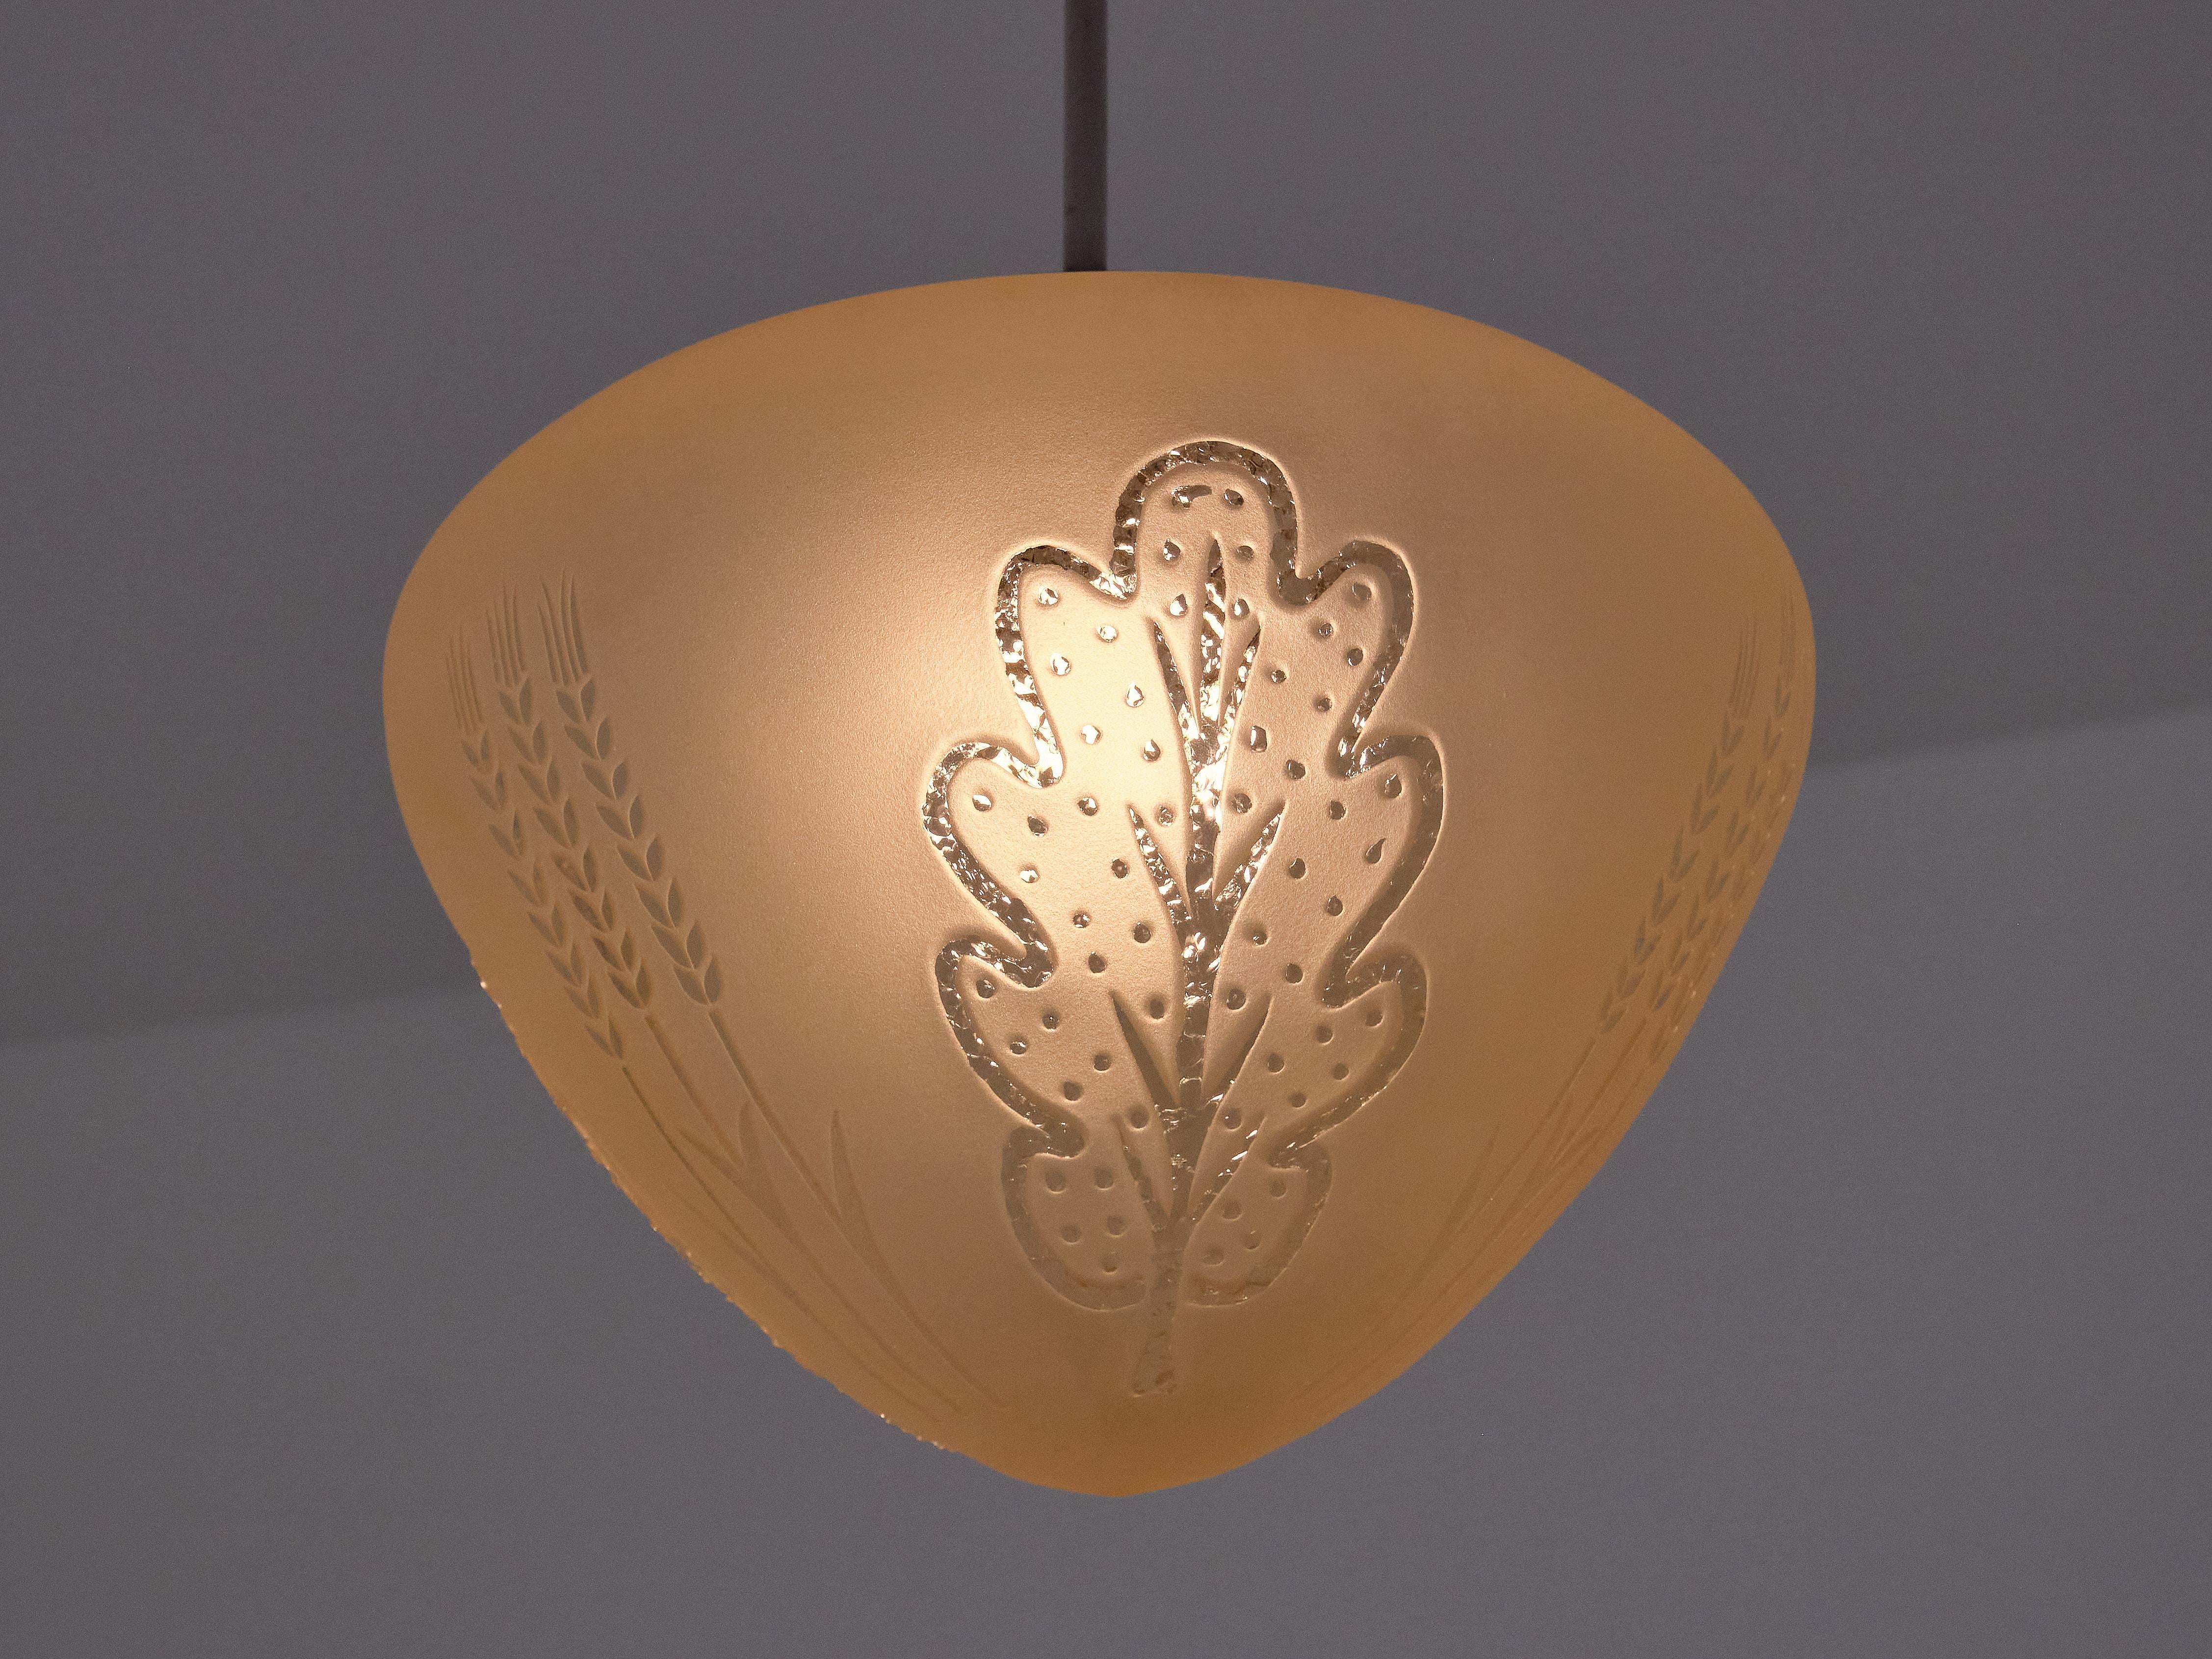 Metal Edward Hald Attributed Pendant Lamp, Decorated Glass, Orrefors, Sweden, 1930s For Sale